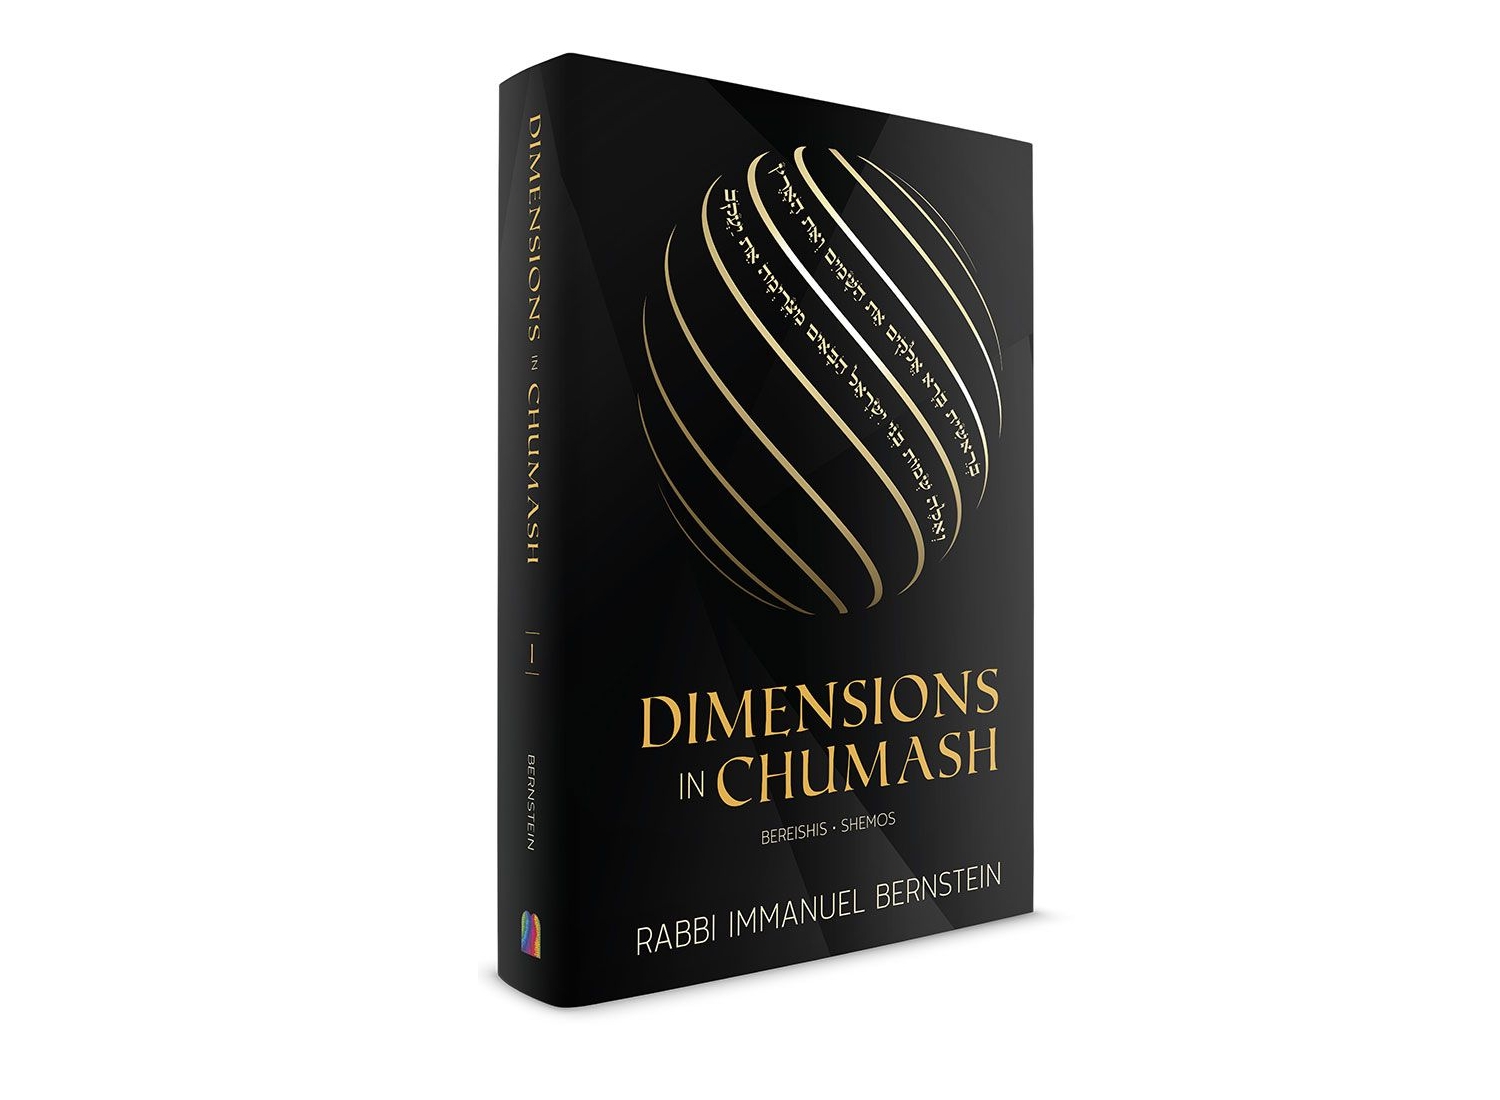 Book Review: Dimensions in Chumash